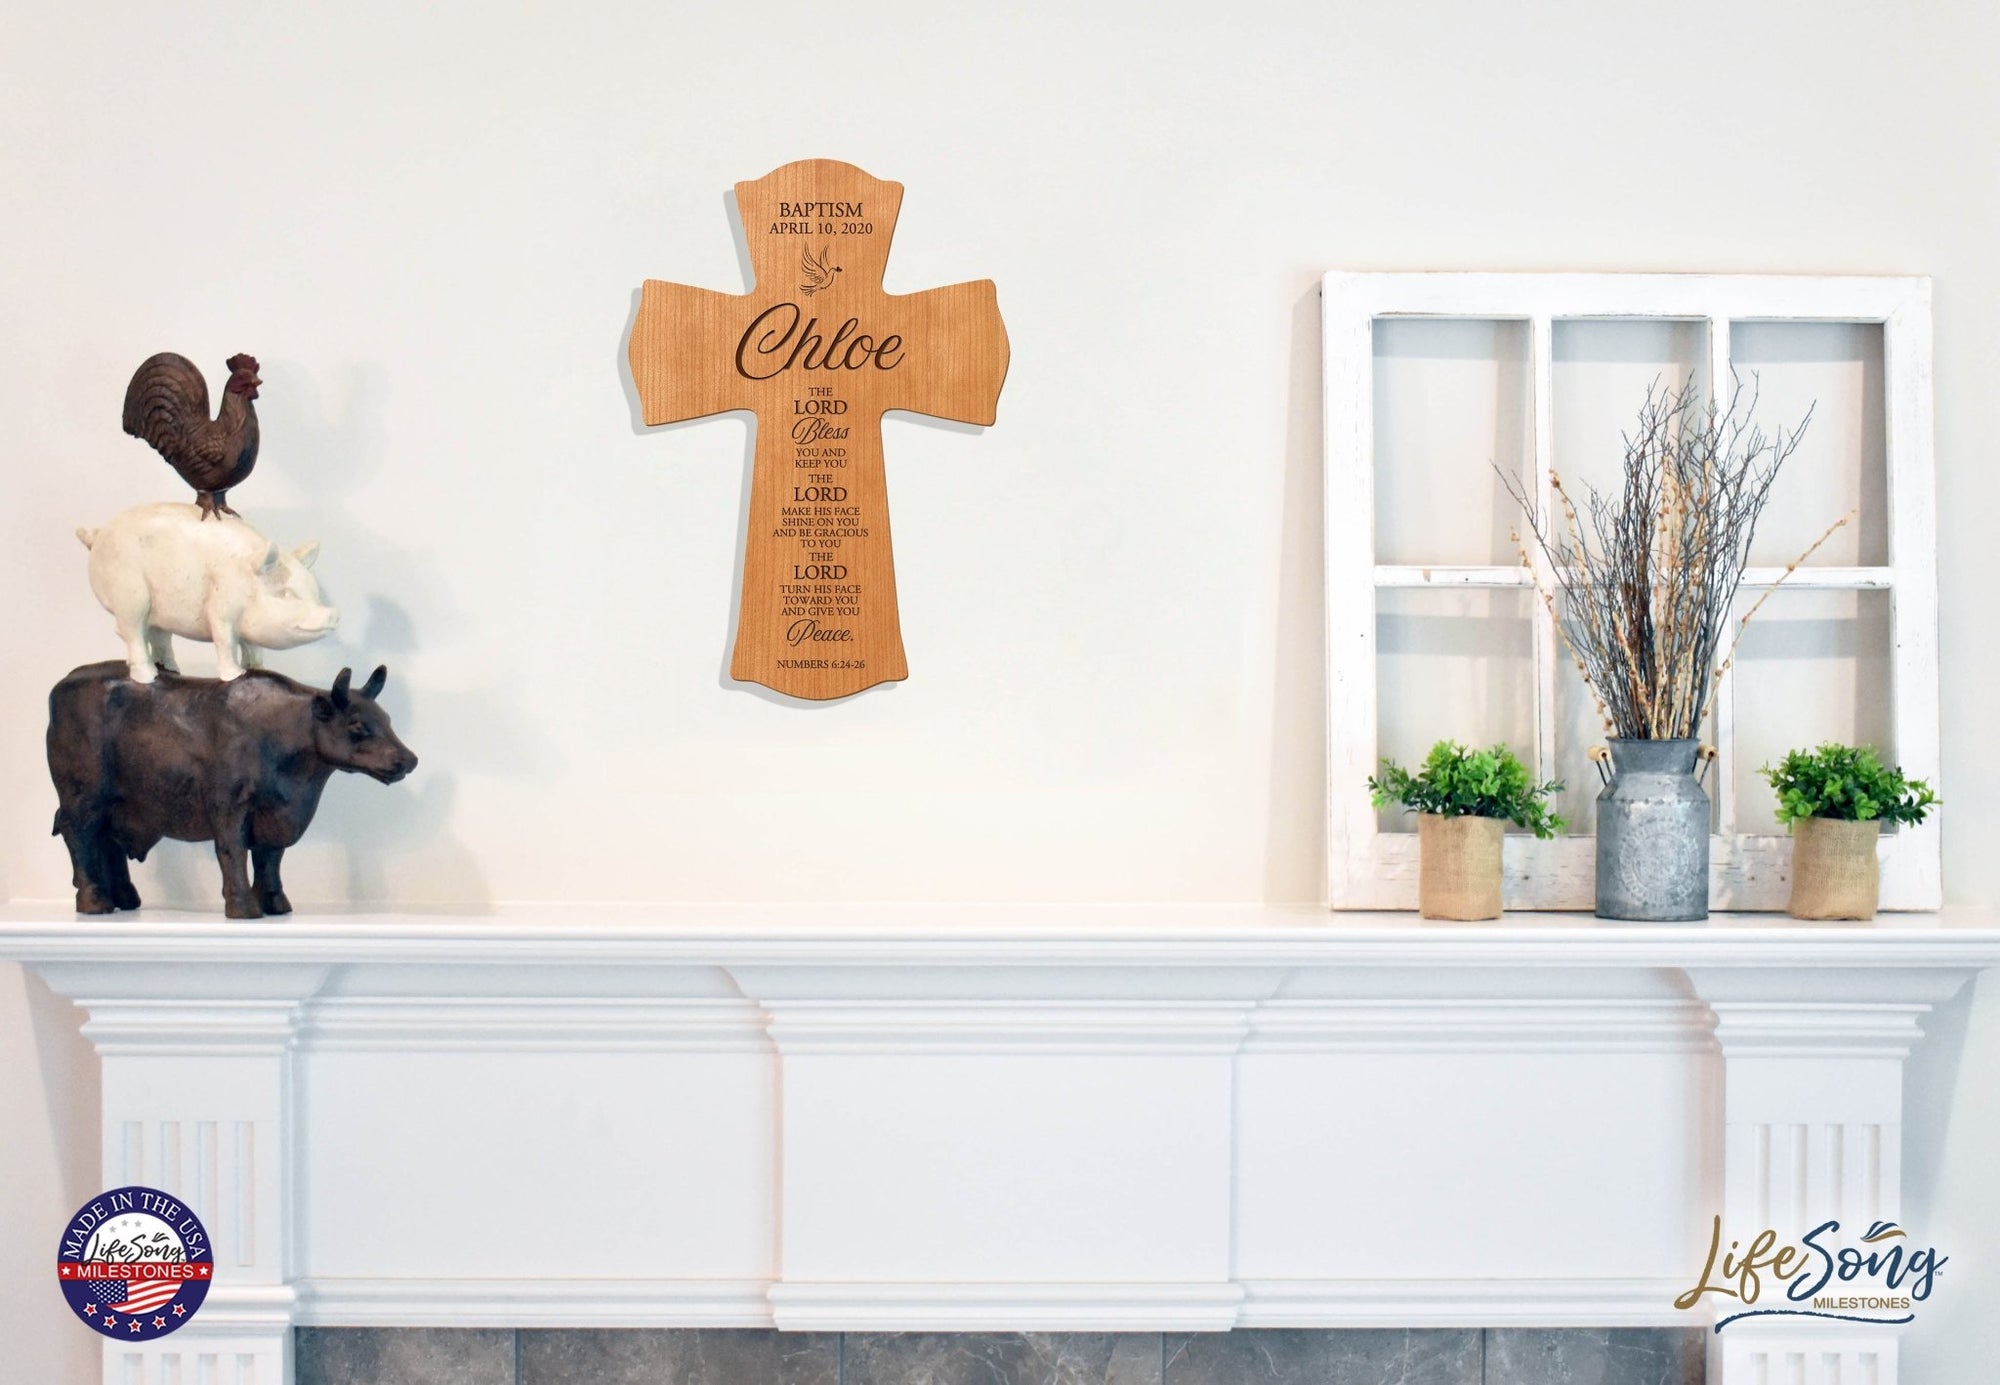 Personalized Wooden Baptism Wall Cross